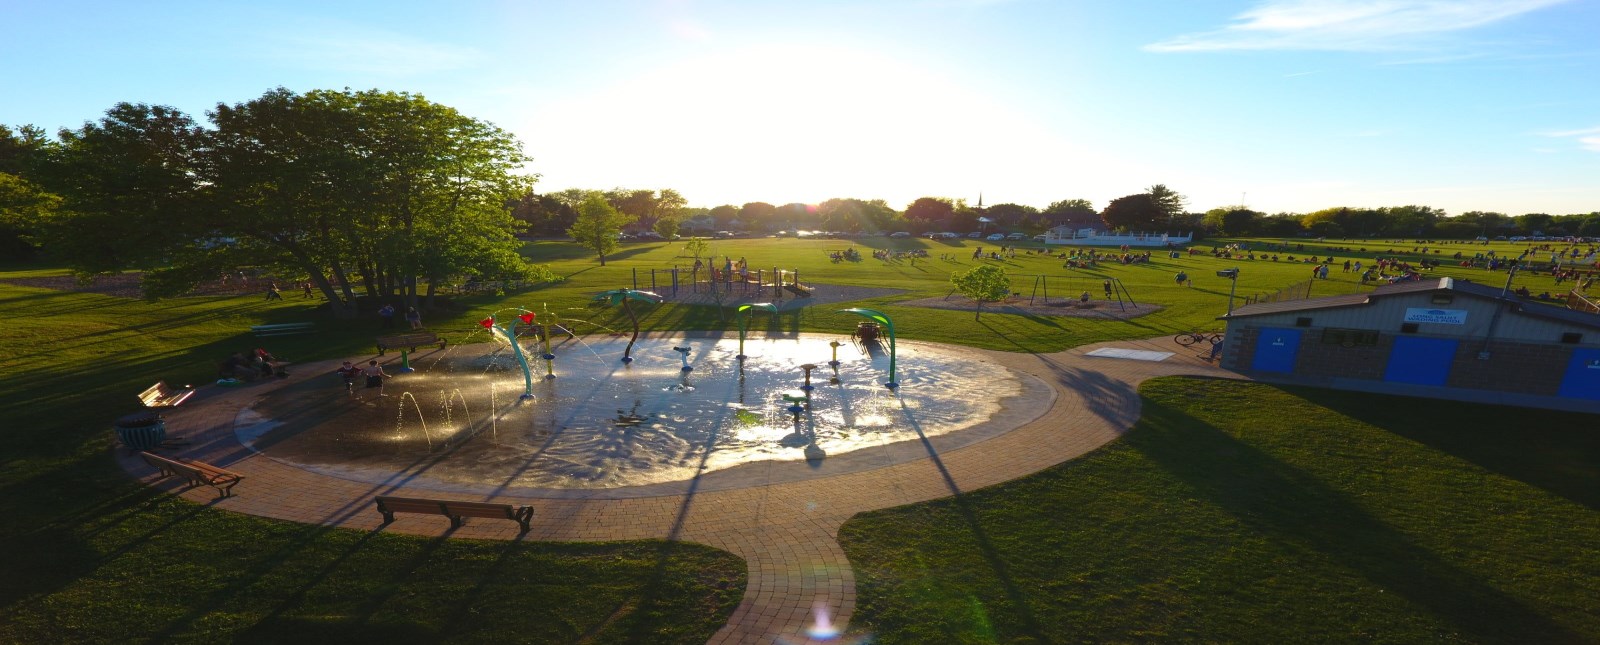 Overhead photo of splash pad with children playing in the park in the distance